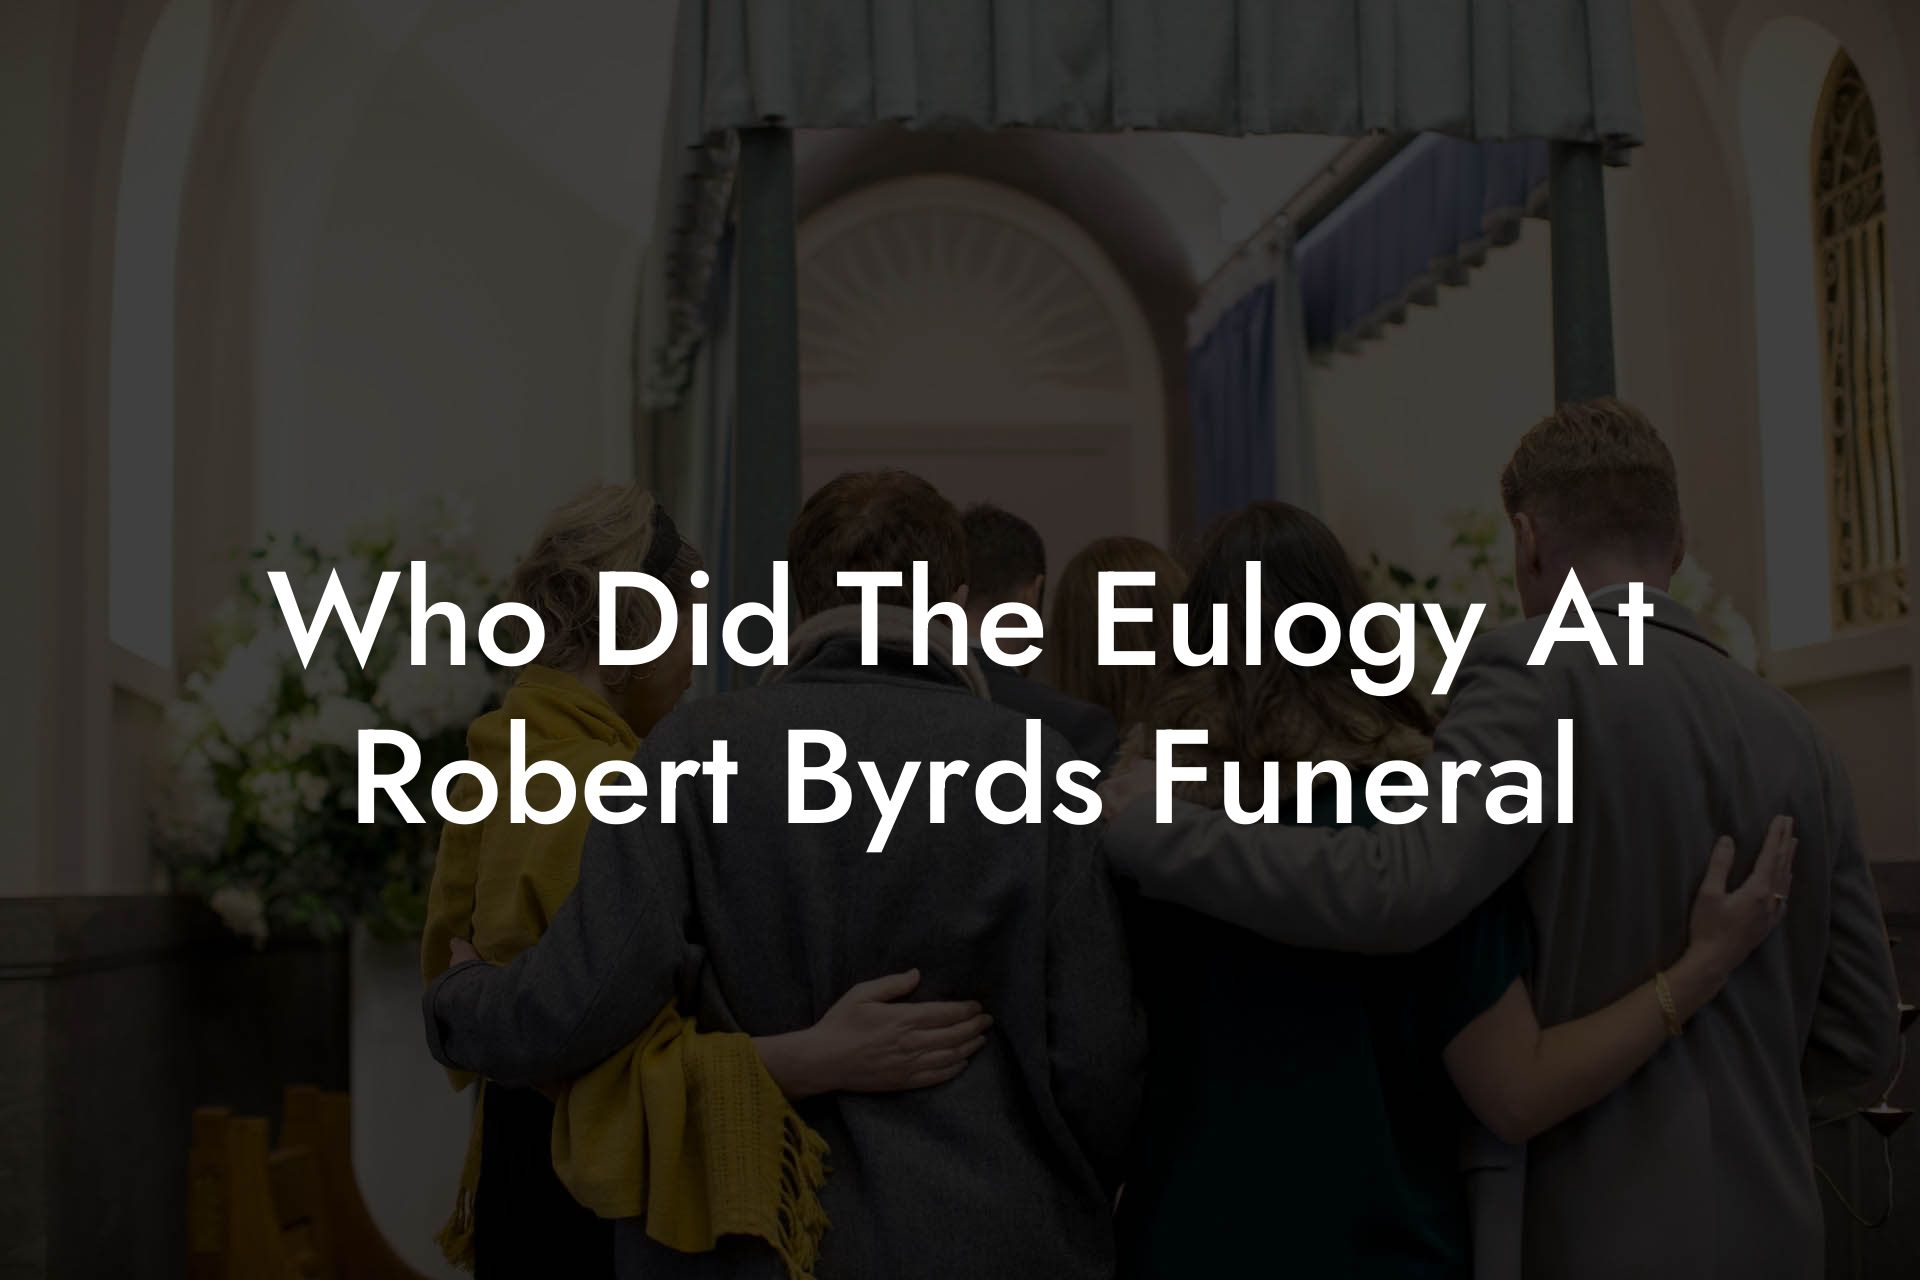 Who Did The Eulogy At Robert Byrd's Funeral